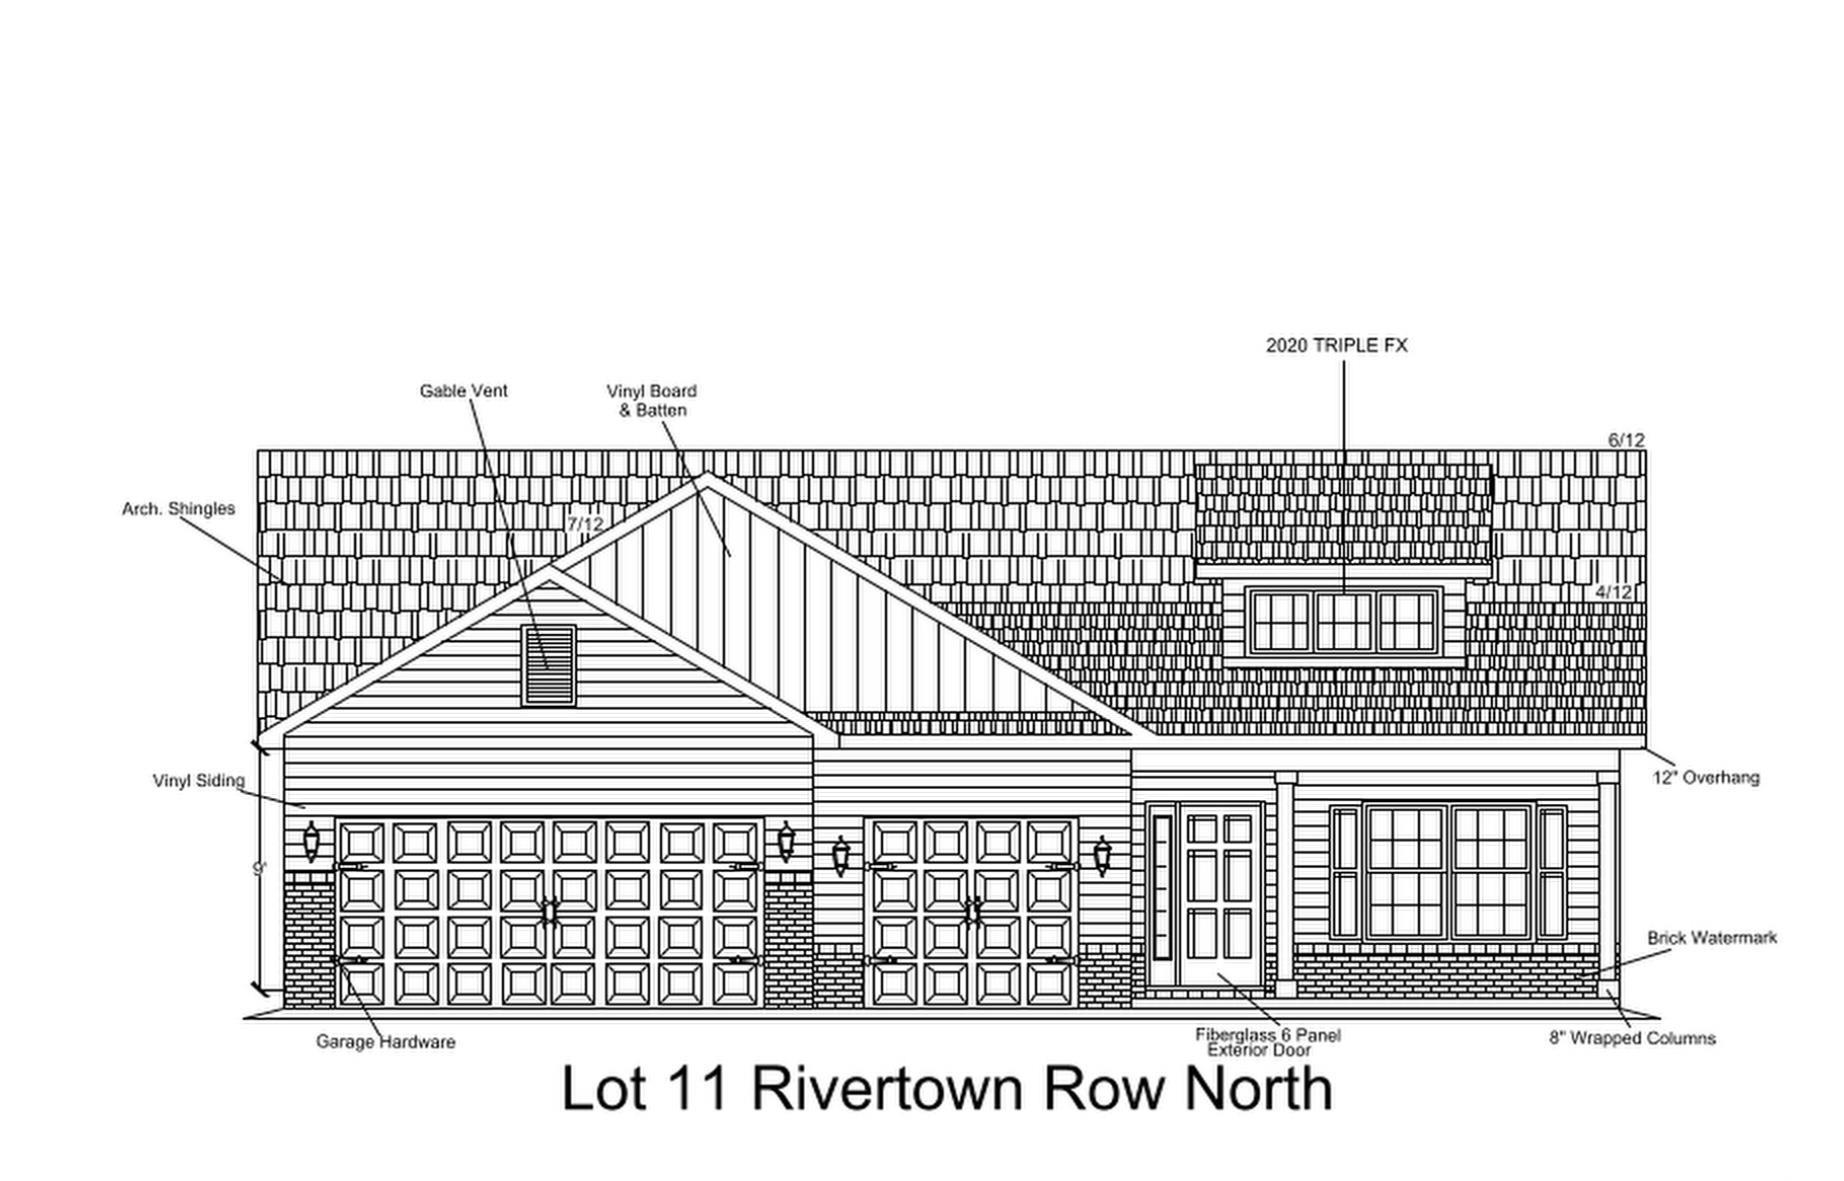 welcome to rivertown row north, the most anticipated new development in the heart of conway. enjoy the comfort of natural gas heat, cooking & tankless hot water in this 1876 sq ft buxton model with 3 car garage, that sits on a 1/4 acre lot. this 3 bedroom, 3 bath split floor plan has a large rear master suite with access to the laundry room from the master closet, vaulted great room ceilings, granite kitchen counter tops, and a kitchen bar w/ seating. the waterproof laminate plank flooring extends throughout the kitchen baths  and living areas. the third bedroom is an upstairs suite with its own full bath. there is also a 3 car painted and trimmed garage w/ drop down attic access, laundry room pantry,  whole yard irrigation, covered front porch, and a covered rear porch with an additional concrete patio that doubles your outdoor entertainment space. all homes in rivertown row north feature wider than average lots, open floor plans, 9' ceilings, painted garage interiors, gutters, fully cased windows, gaf high performance architectural shingles, 12" roof overhangs, aristokraft stone gray painted birch shaker cabinets, rinnai tankless water heater, frigidaire stainless appliances, and many other upgraded architectural details. the neighborhood features sidewalks, street lighting and a community pool with pavilion. building lifestyles for over 35 years, we remain the premier homebuilder of new residential communities and custom homes in the grand strand and surrounding areas. we are three-time winners of the best home builder award from wmbf news best of the grand strand. in 2023, we were also voted best residential real estate developer in the myrtle beach herald reader’s choice awards. we began and remain in the grand strand, and we want you to experience the local pride we build today and every day in horry and georgetown counties. all pics are not from actual home. pics are from a similar floor plan. actual colors, feature and upgrades will be different.